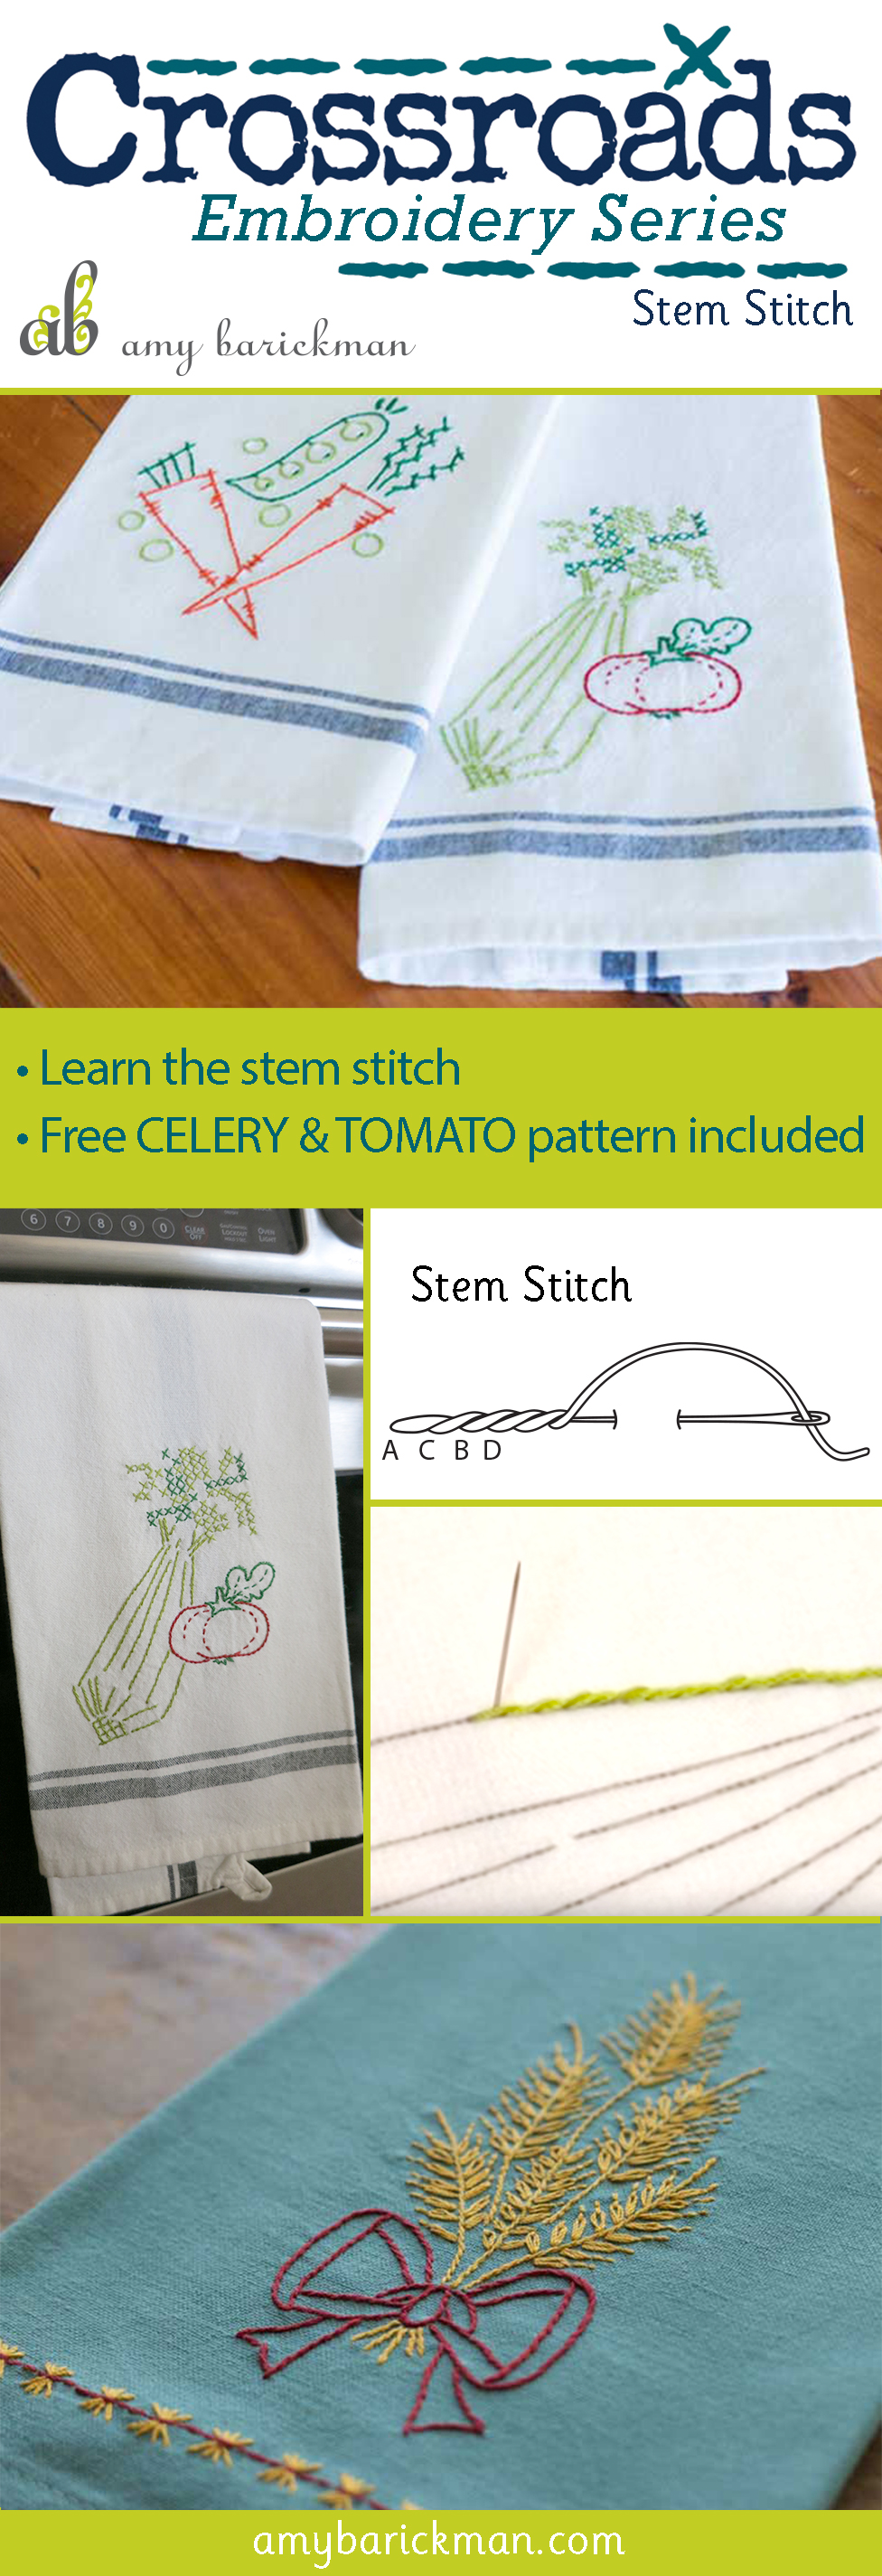 Author Amy Barickman teaches the stem stitch in this free video tutorial!